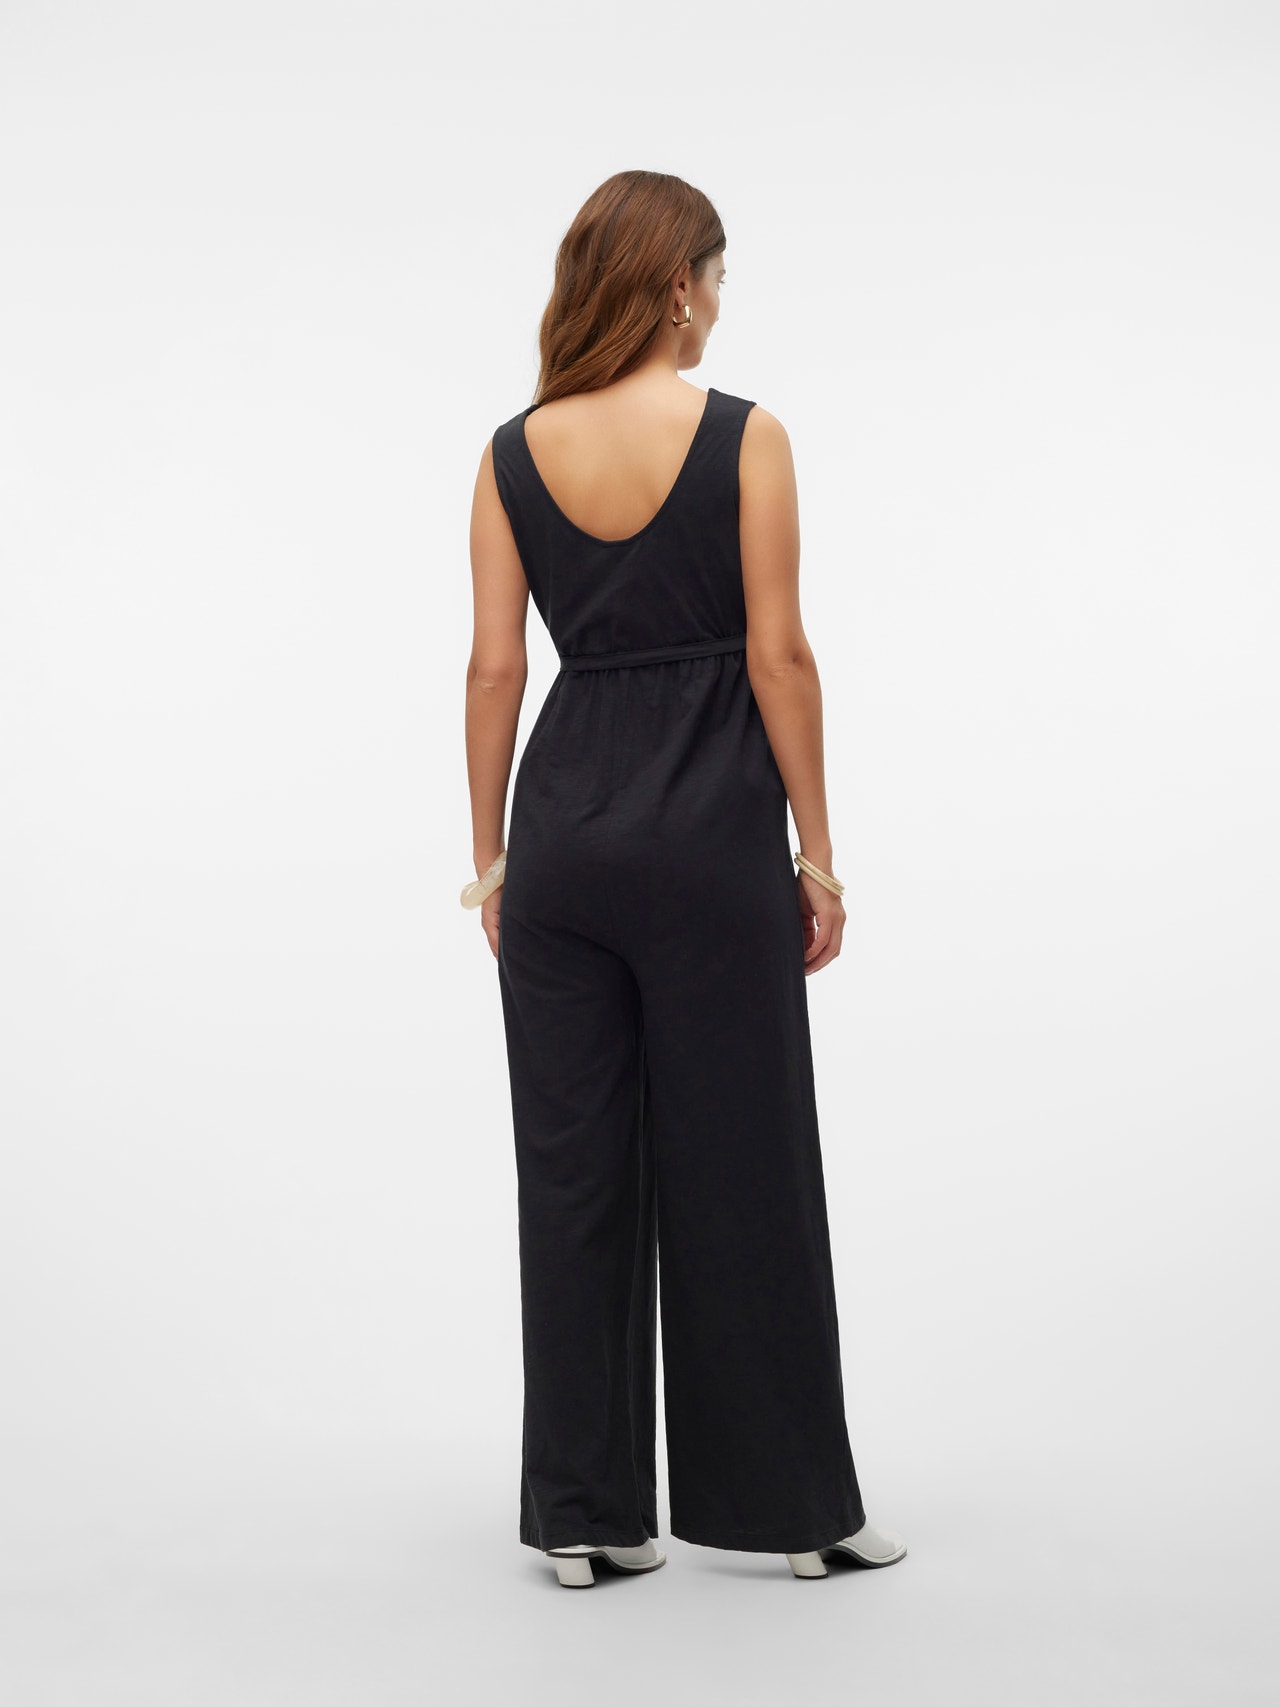 MAMA.LICIOUS Umstands-jumpsuit -Black - 20020162